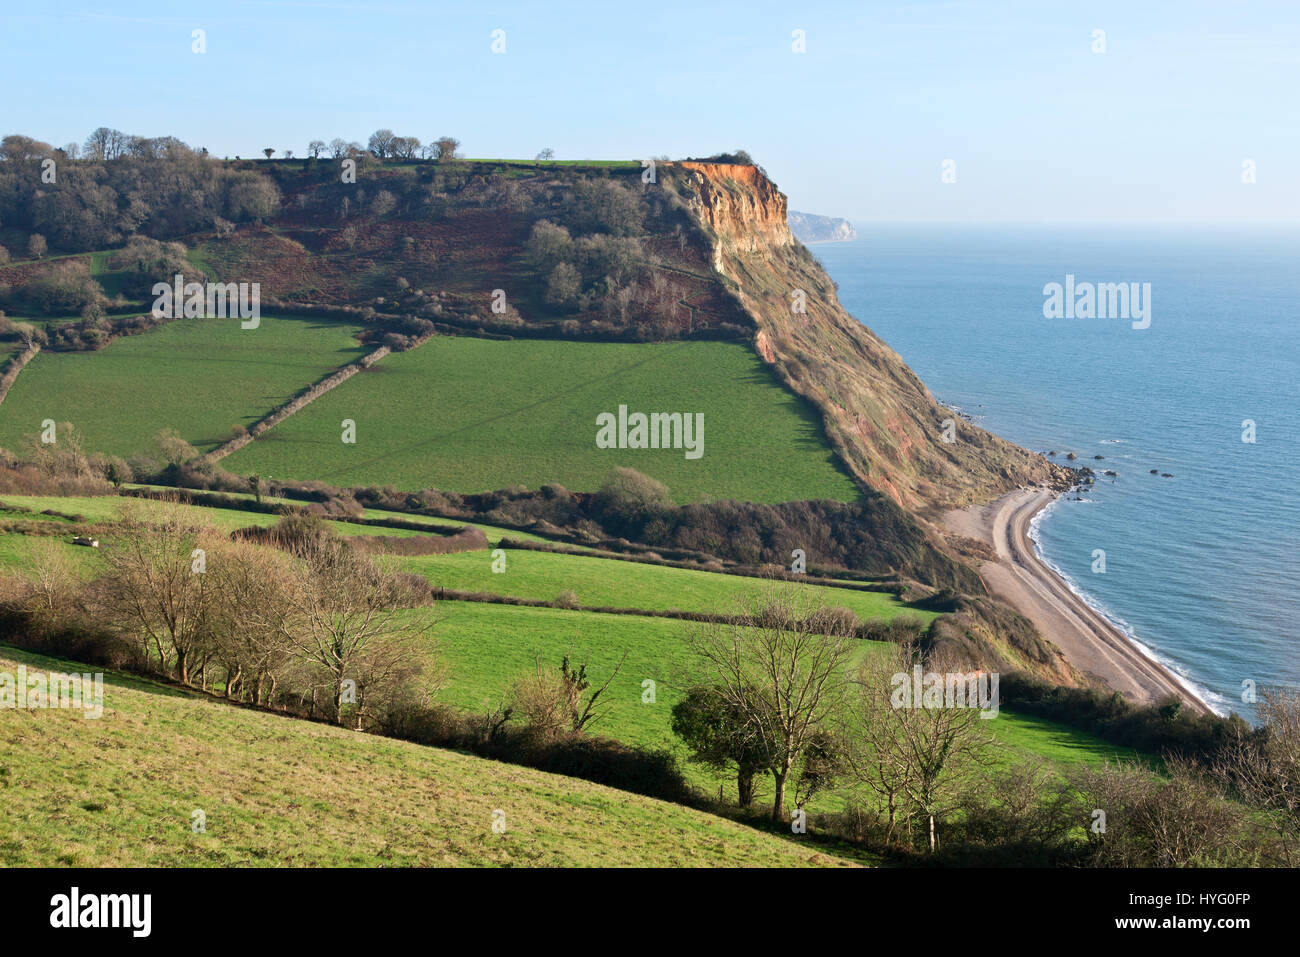 The view along Devons Jurassic Coast from Salcombe Hill looking eastwards along the coast towards Higher Dunscombe Cliff, part of the East Devon AONB Stock Photo